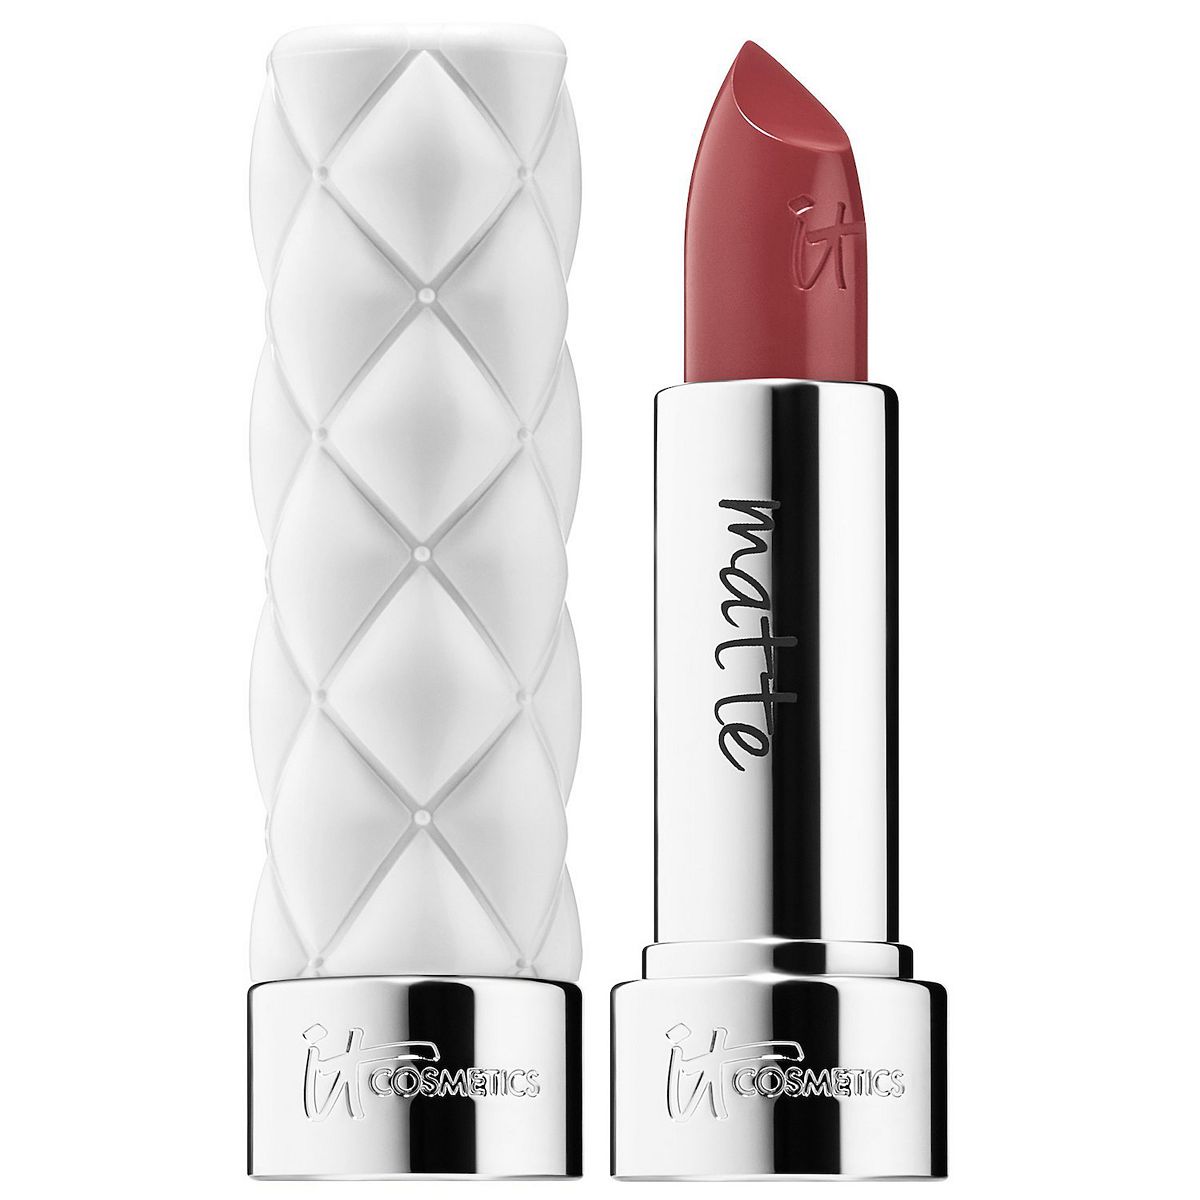 IT Cosmetics Pillow Lips Collagen-Infused Lipstick (Various) $10 + Free Store Pickup at Kohl's or FS on $49+